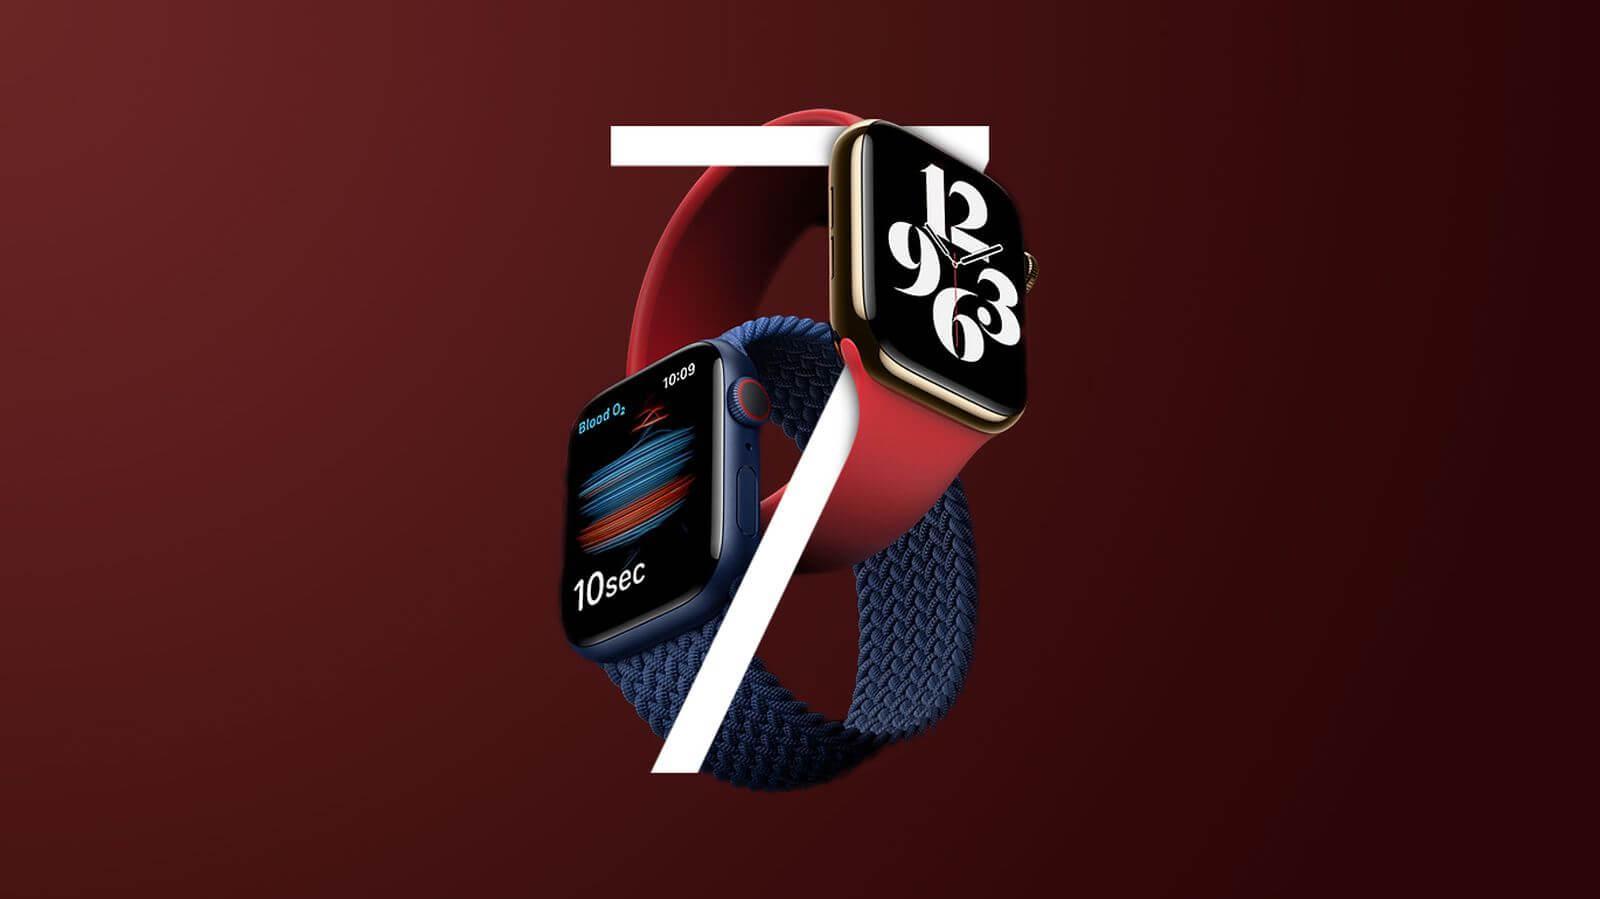 Gurman: “No Chance” Apple Watch Series 7, 7 Will Come With Blood Pressure Sensor